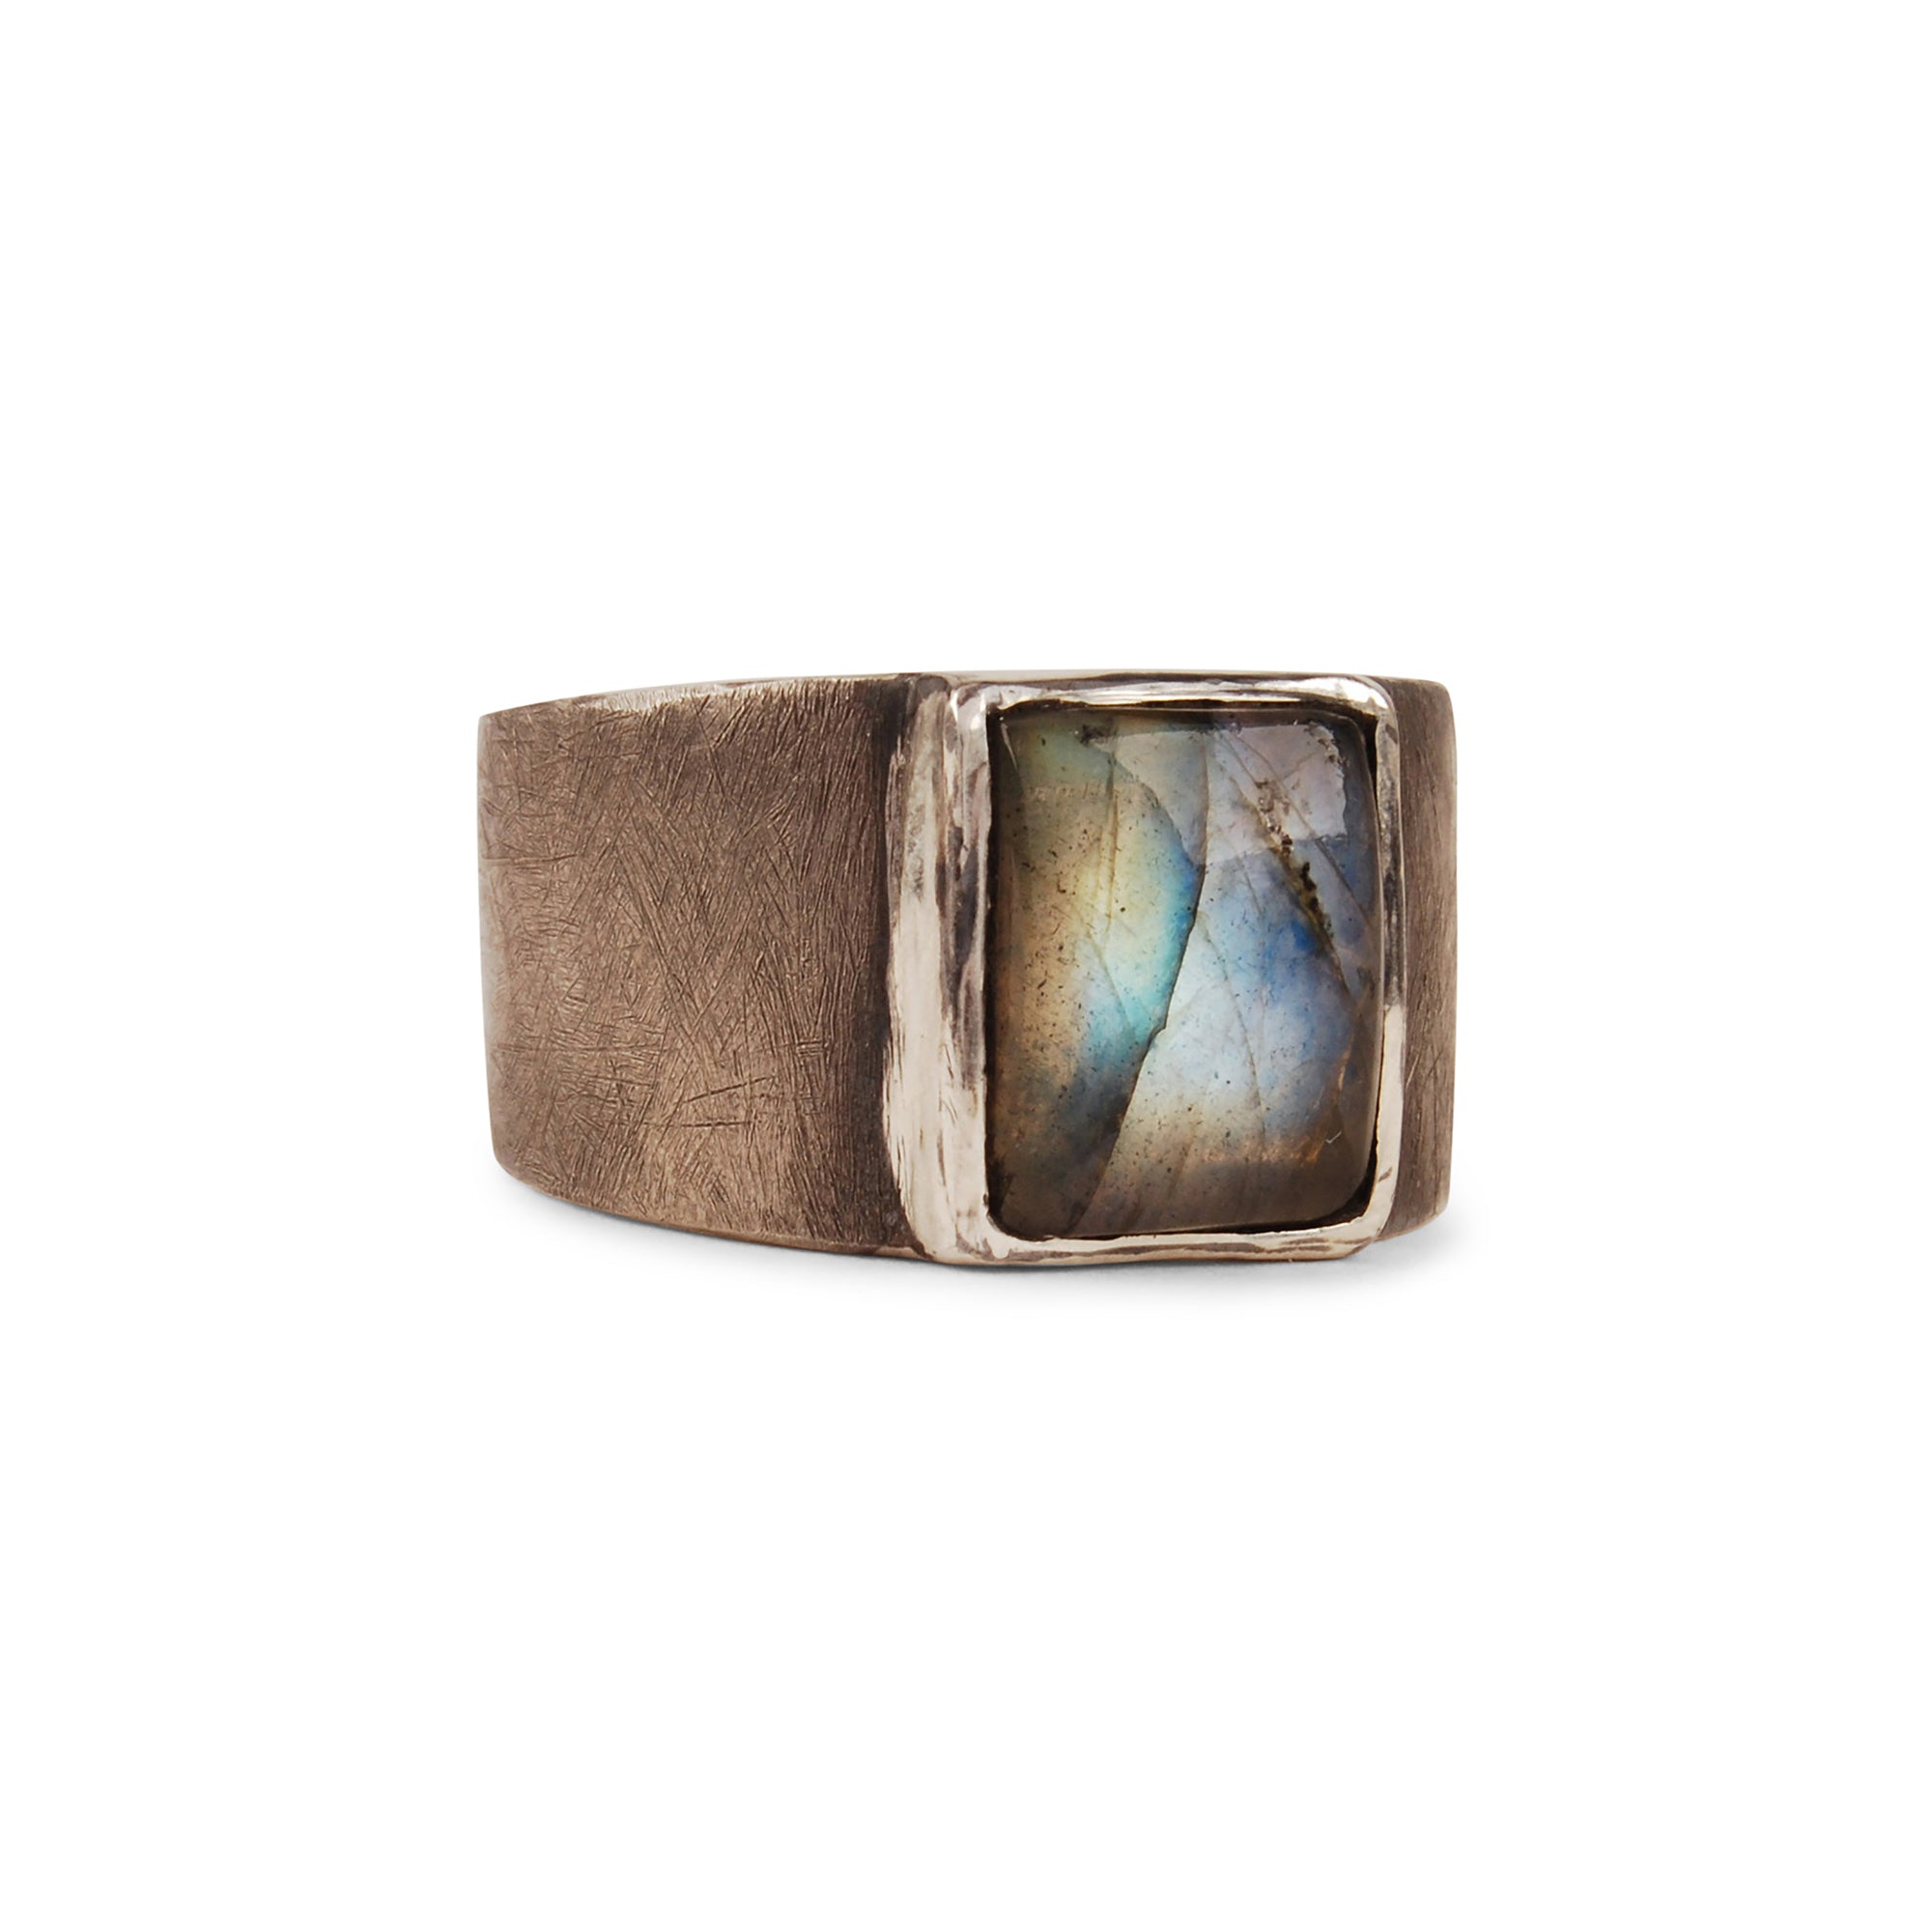 The Grit Rectangle Ring features a rectangular bezel set cabochon stone in your choice of labradorite or lapis